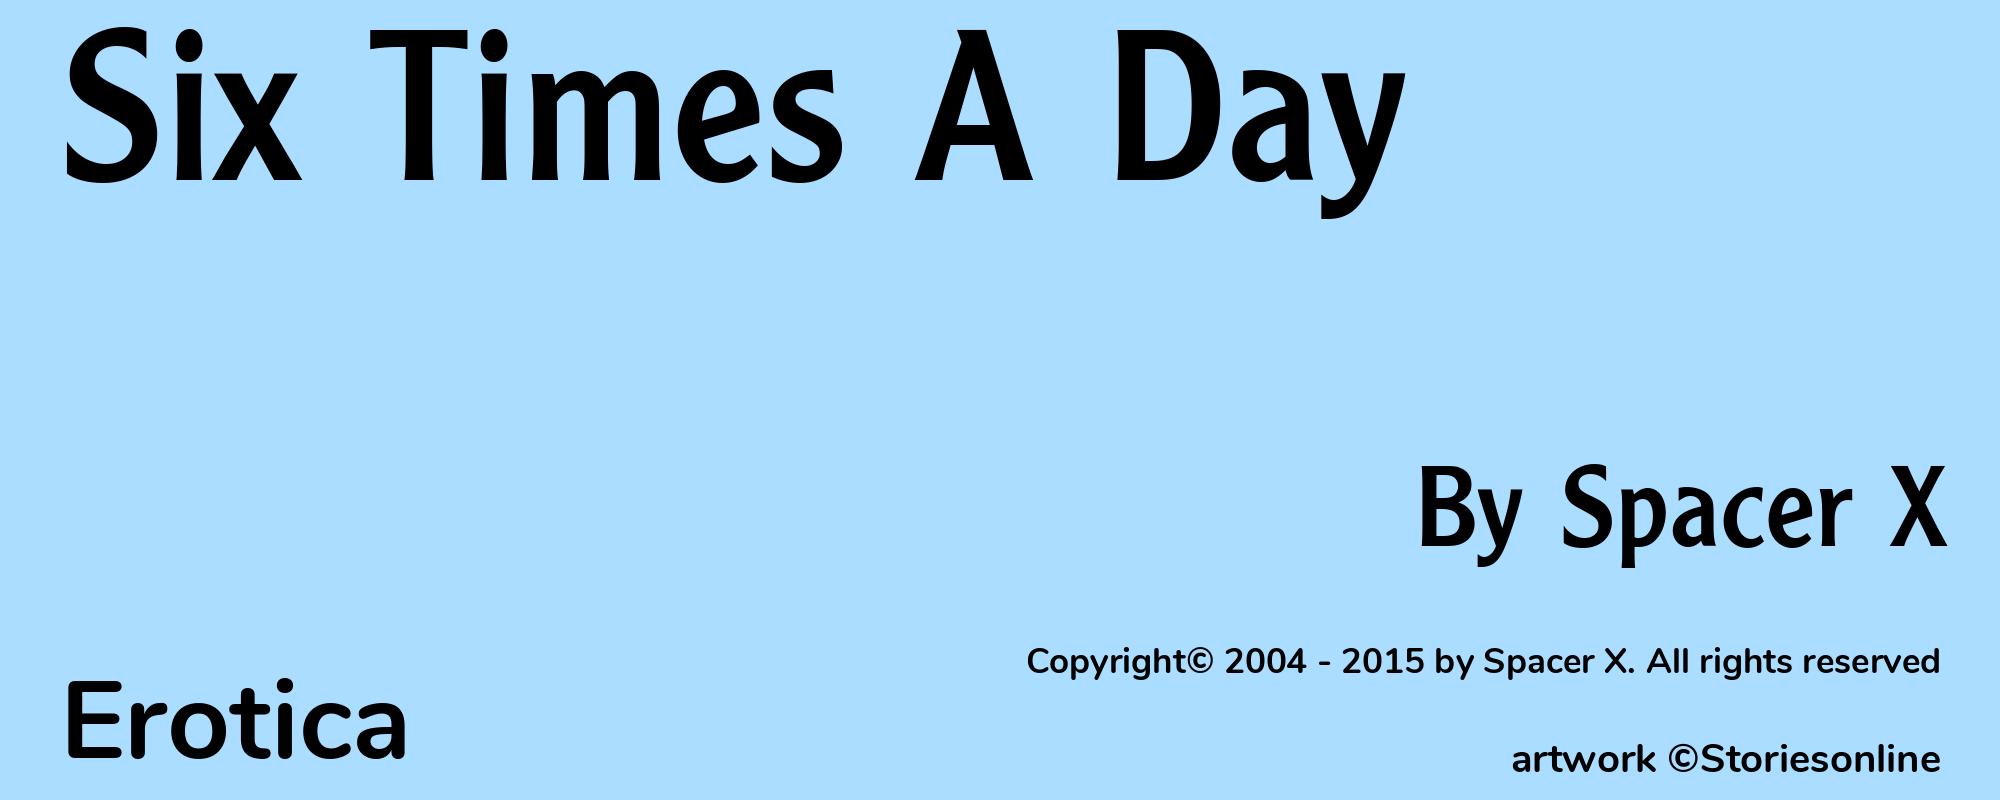 Six Times A Day - Cover